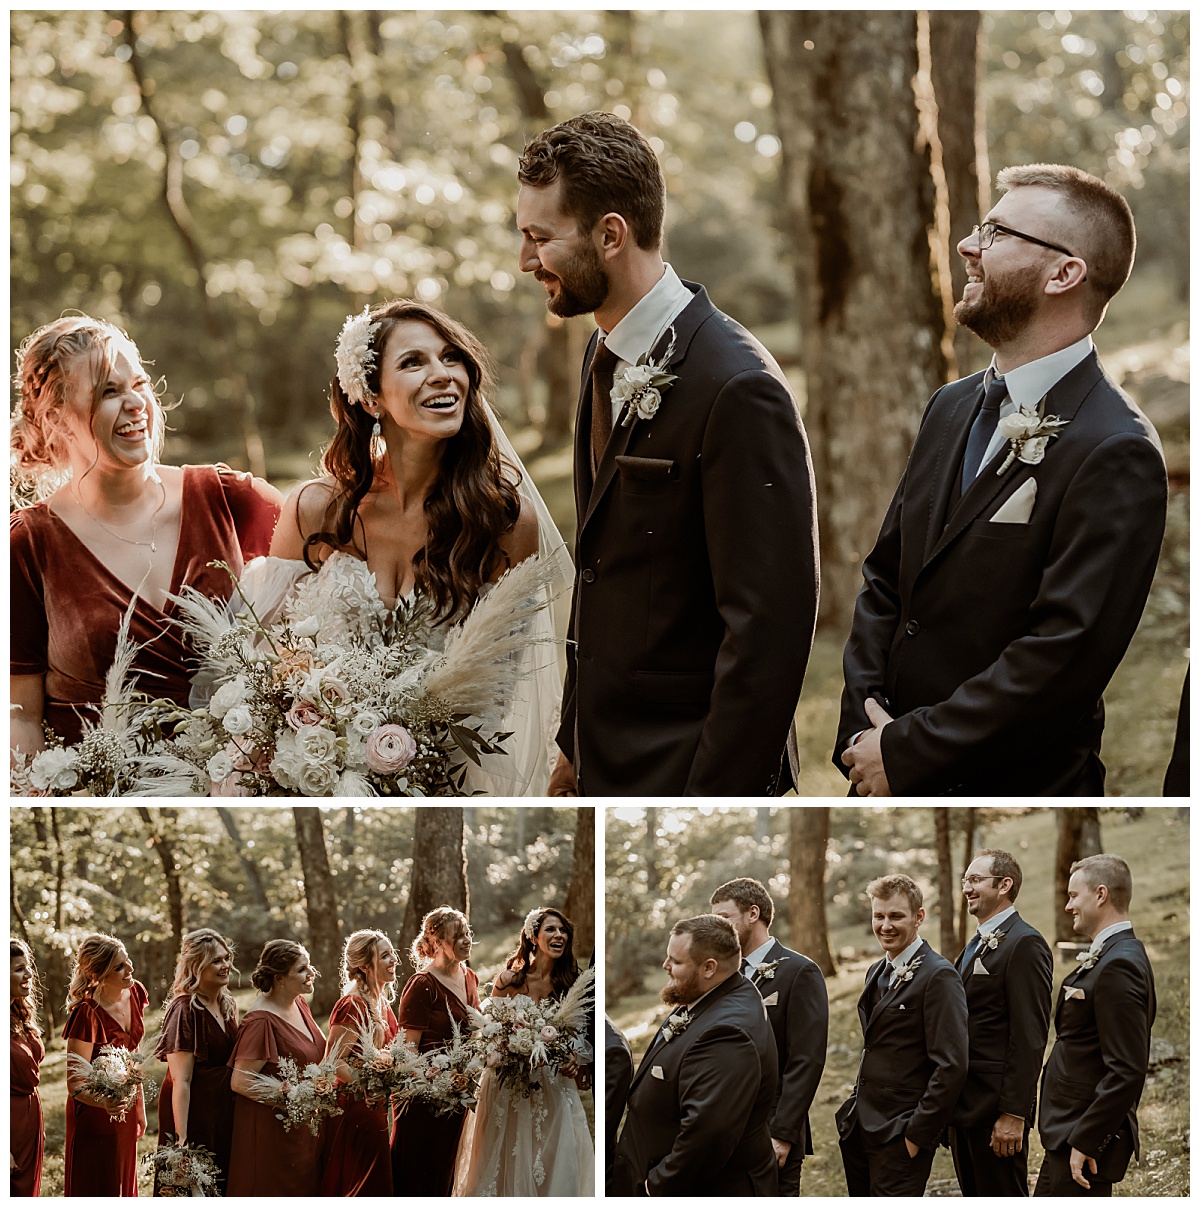 Bridal party portraits after the wedding ceremony at the Twickenham House in Jefferson, NC captured by Paisley Sunshine Studios. 